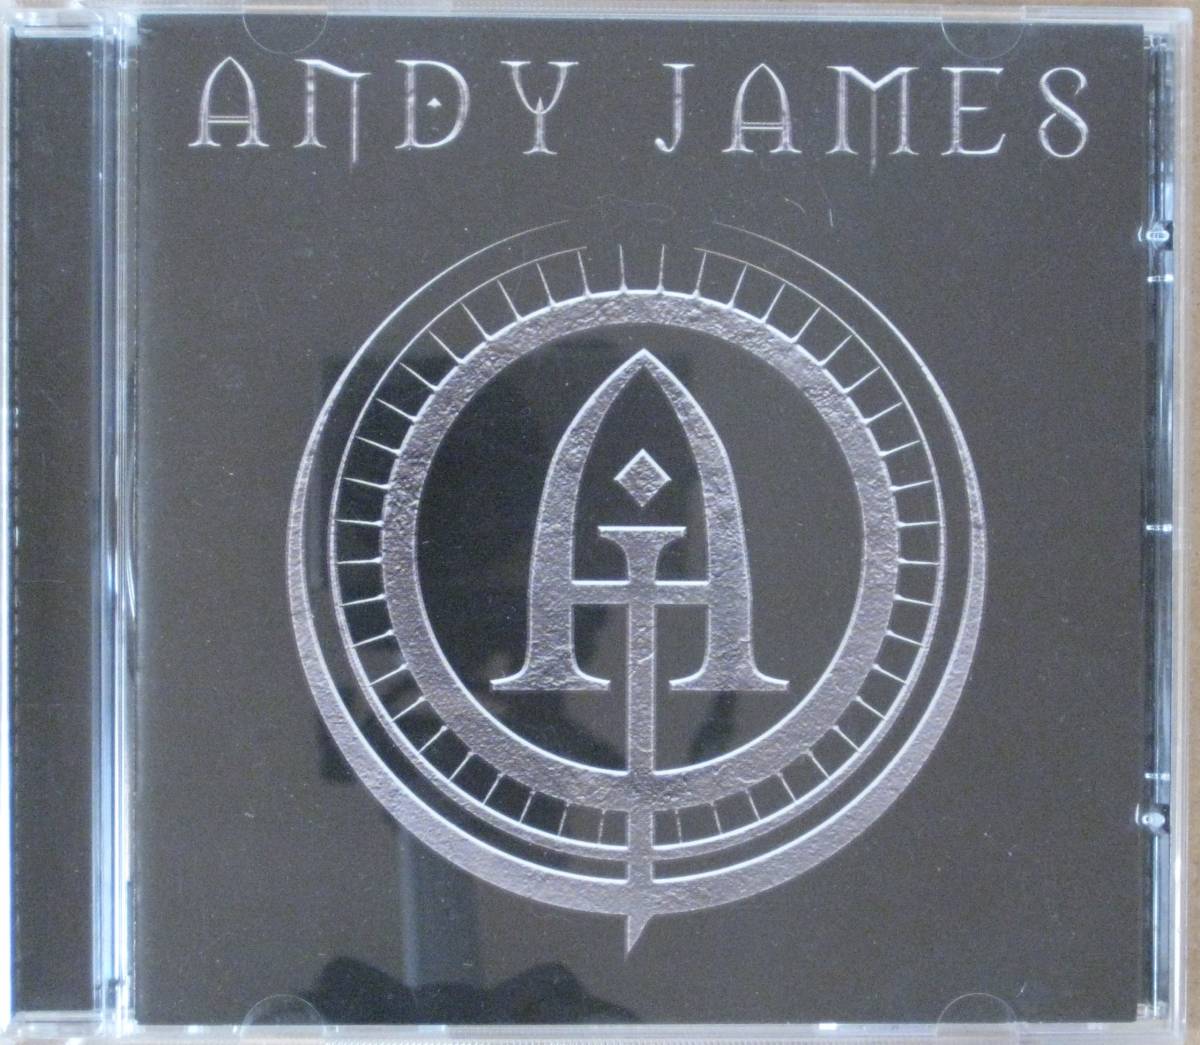 Andy James/アンディ・ジェームズ ＜＜Andy James＞＞　ギターインスト　輸入盤　　_画像1